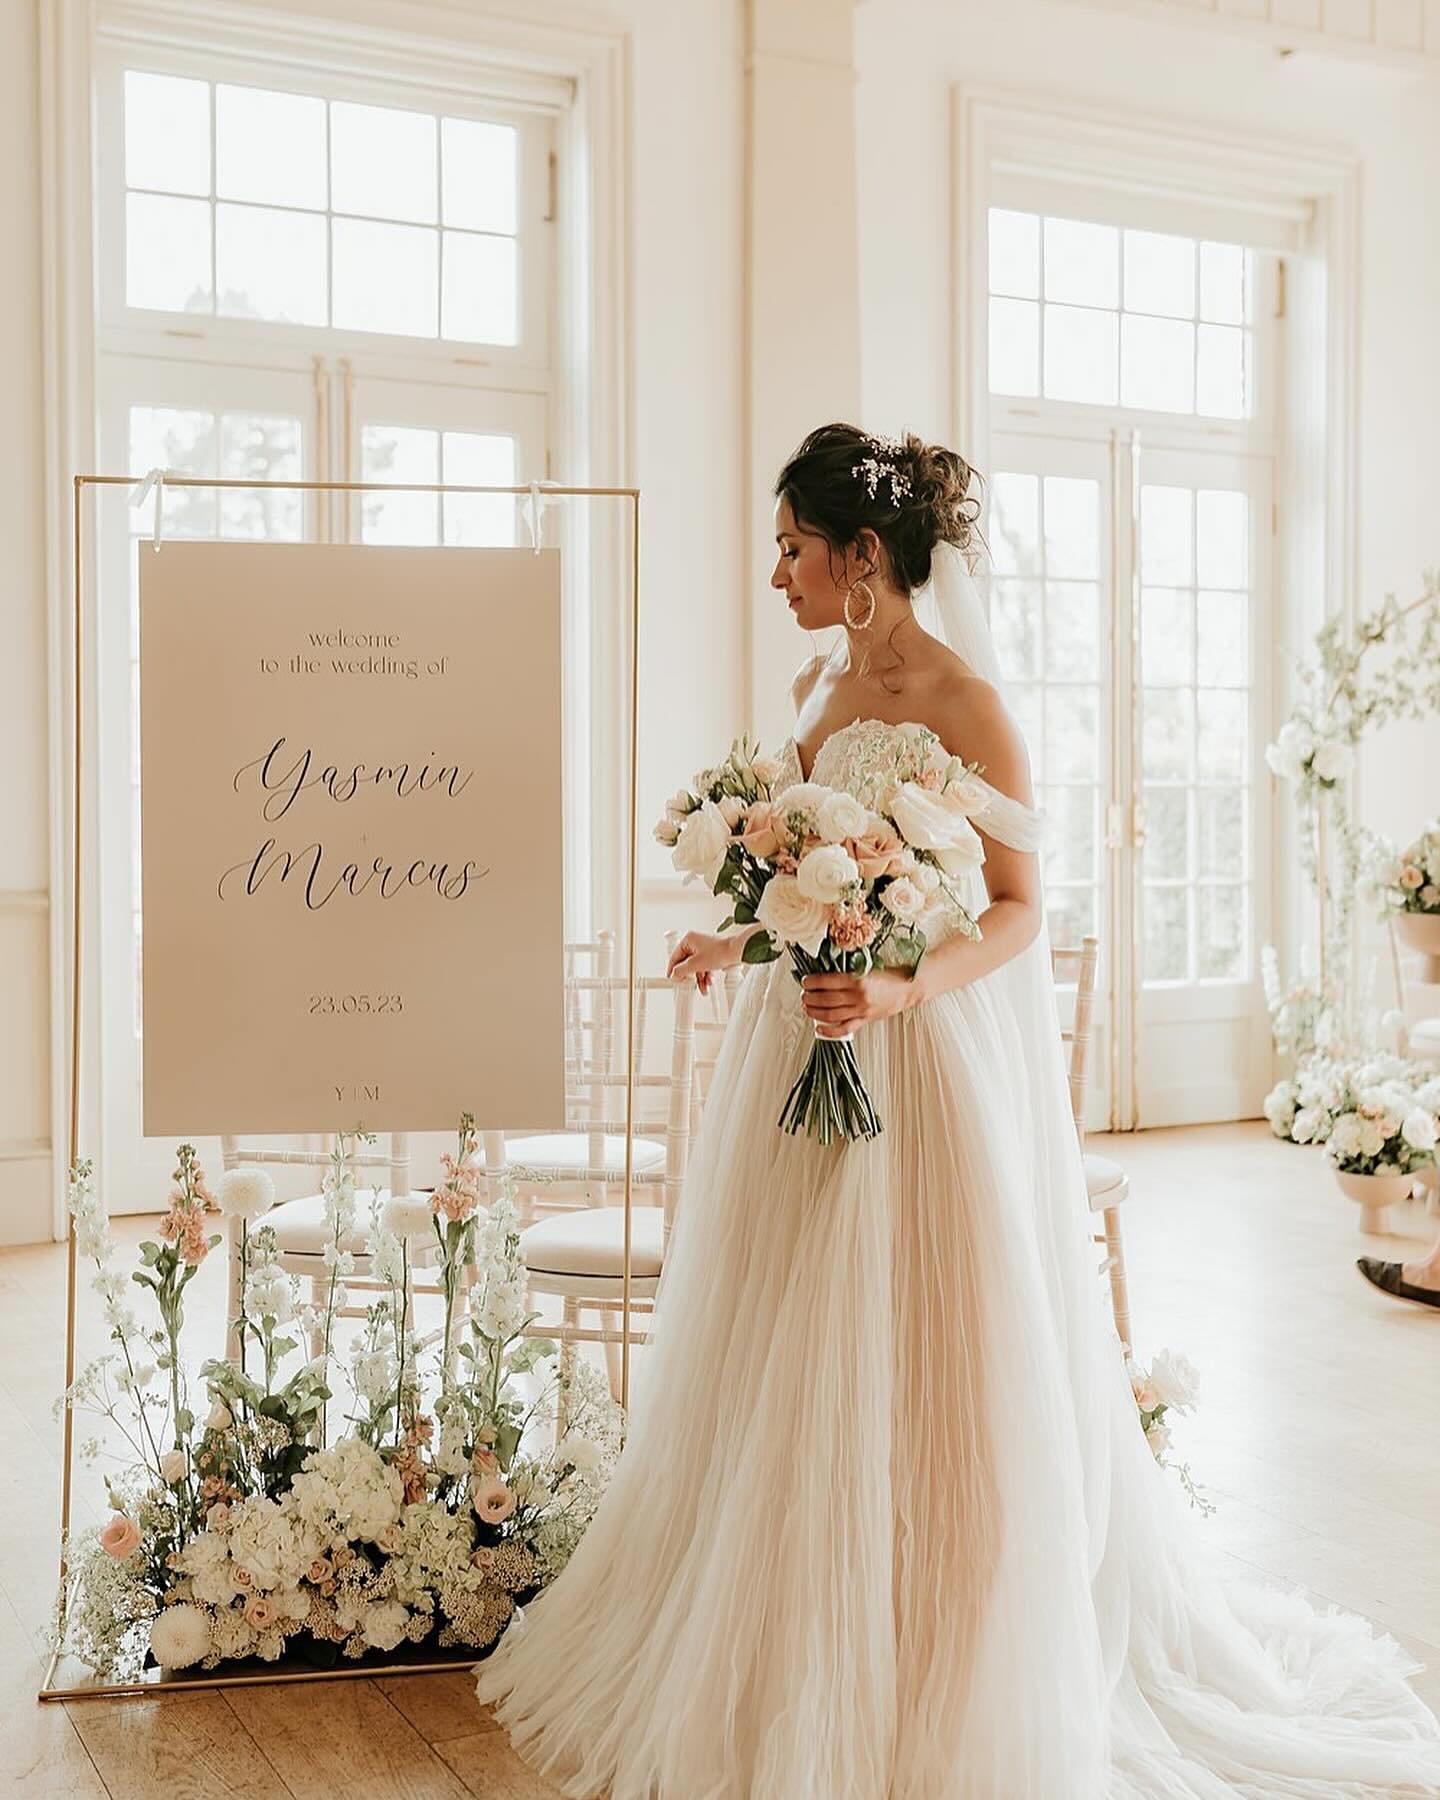 Just the nicest of stationery for your day&hellip;. 

PLANNING AND CONCEPT -@LOVEFLORASTUDIOCO_
PHOTOGRAPHER - @GABRIELASPHOTOGRAPHYANDFILM
FLORIST - @BoonandBloom
STYLIST - @thetwohummingbirds
BRIDAL DRESS - @bellammebridal
CAKE - @chessybakery
BRID